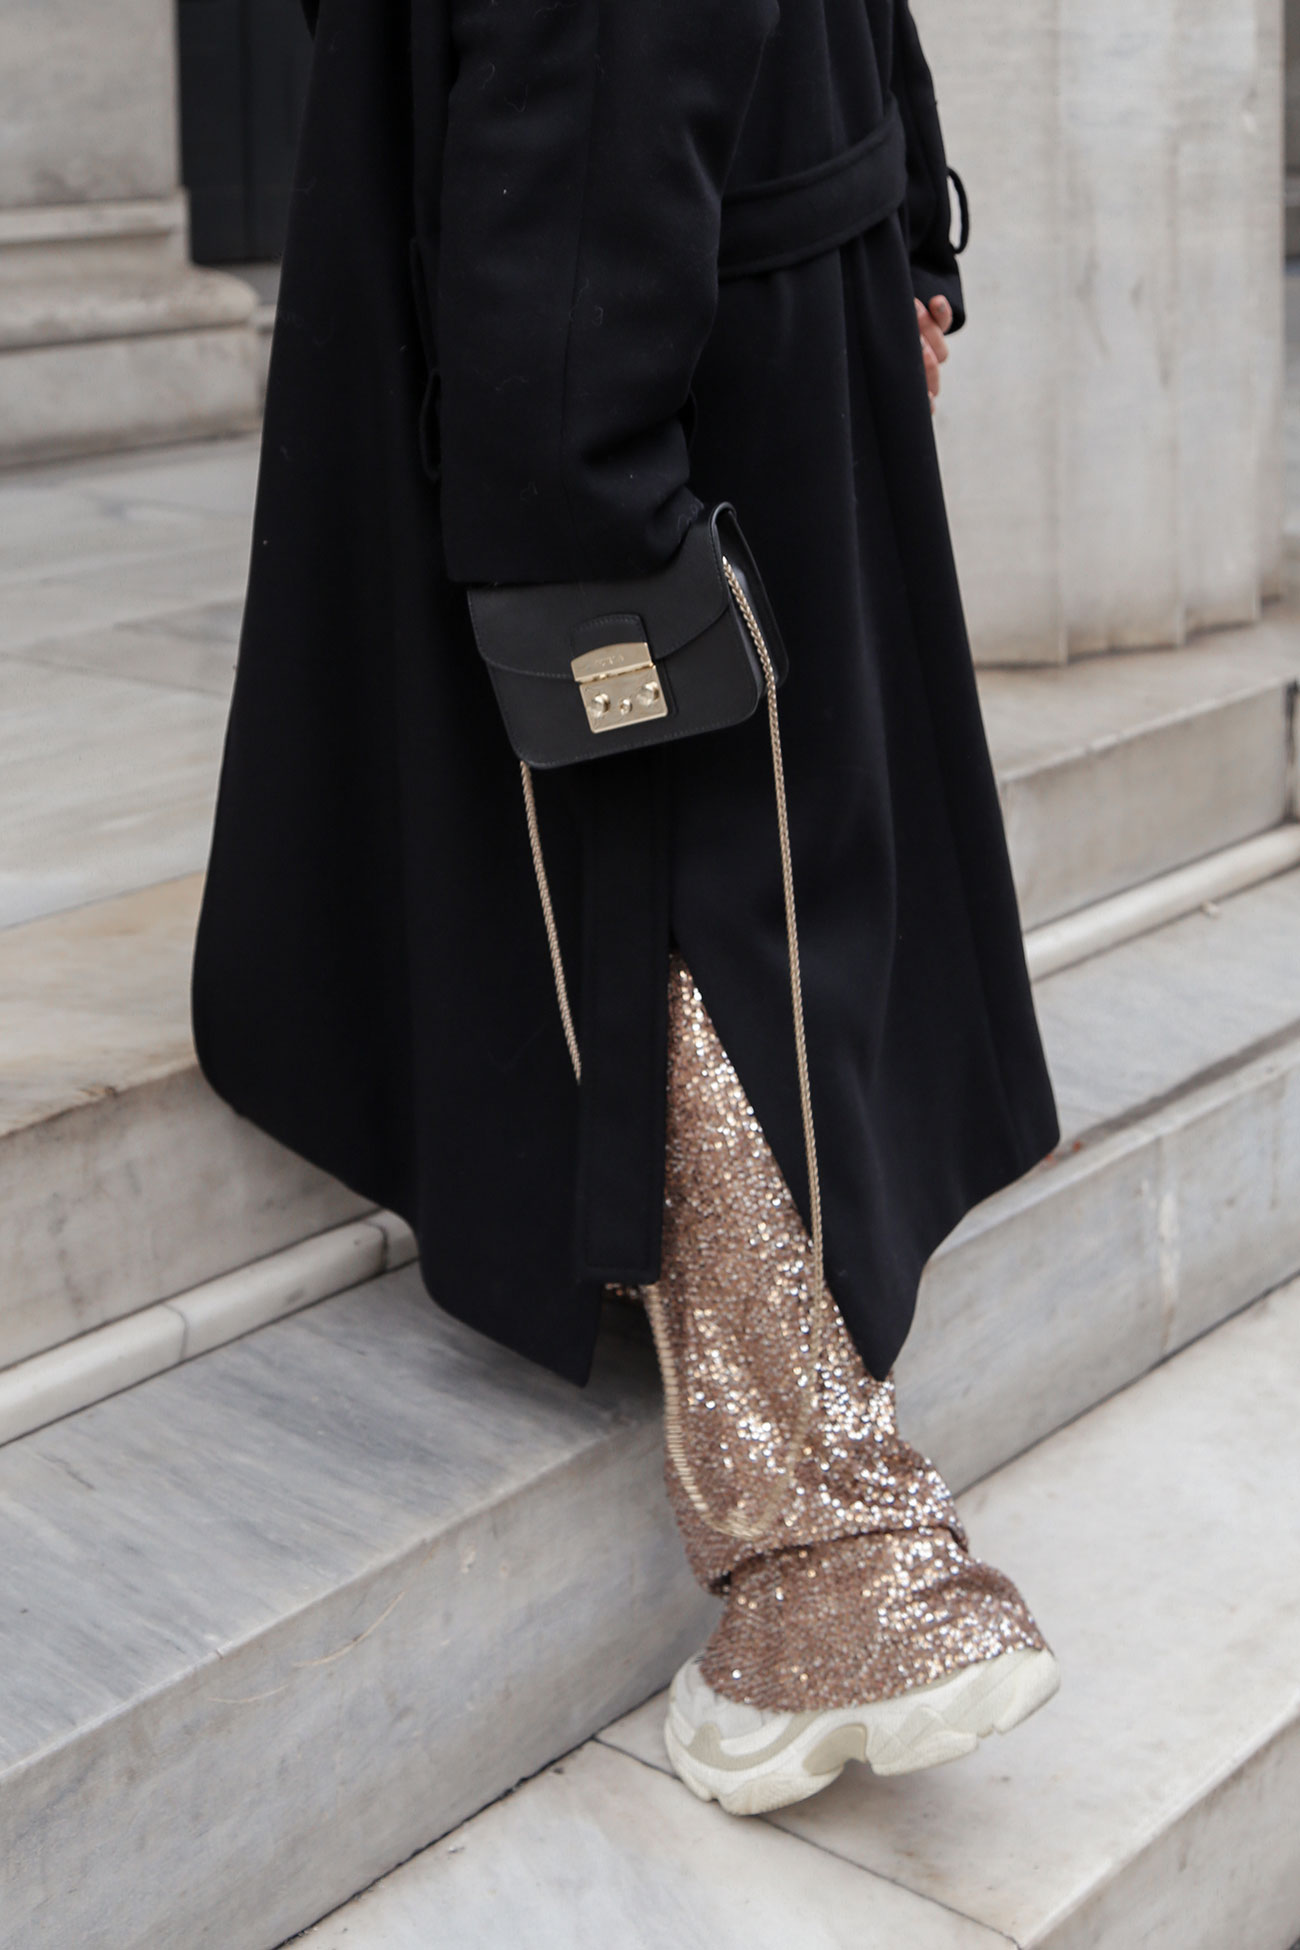 How to wear sequins in the daytime | Stella Asteria